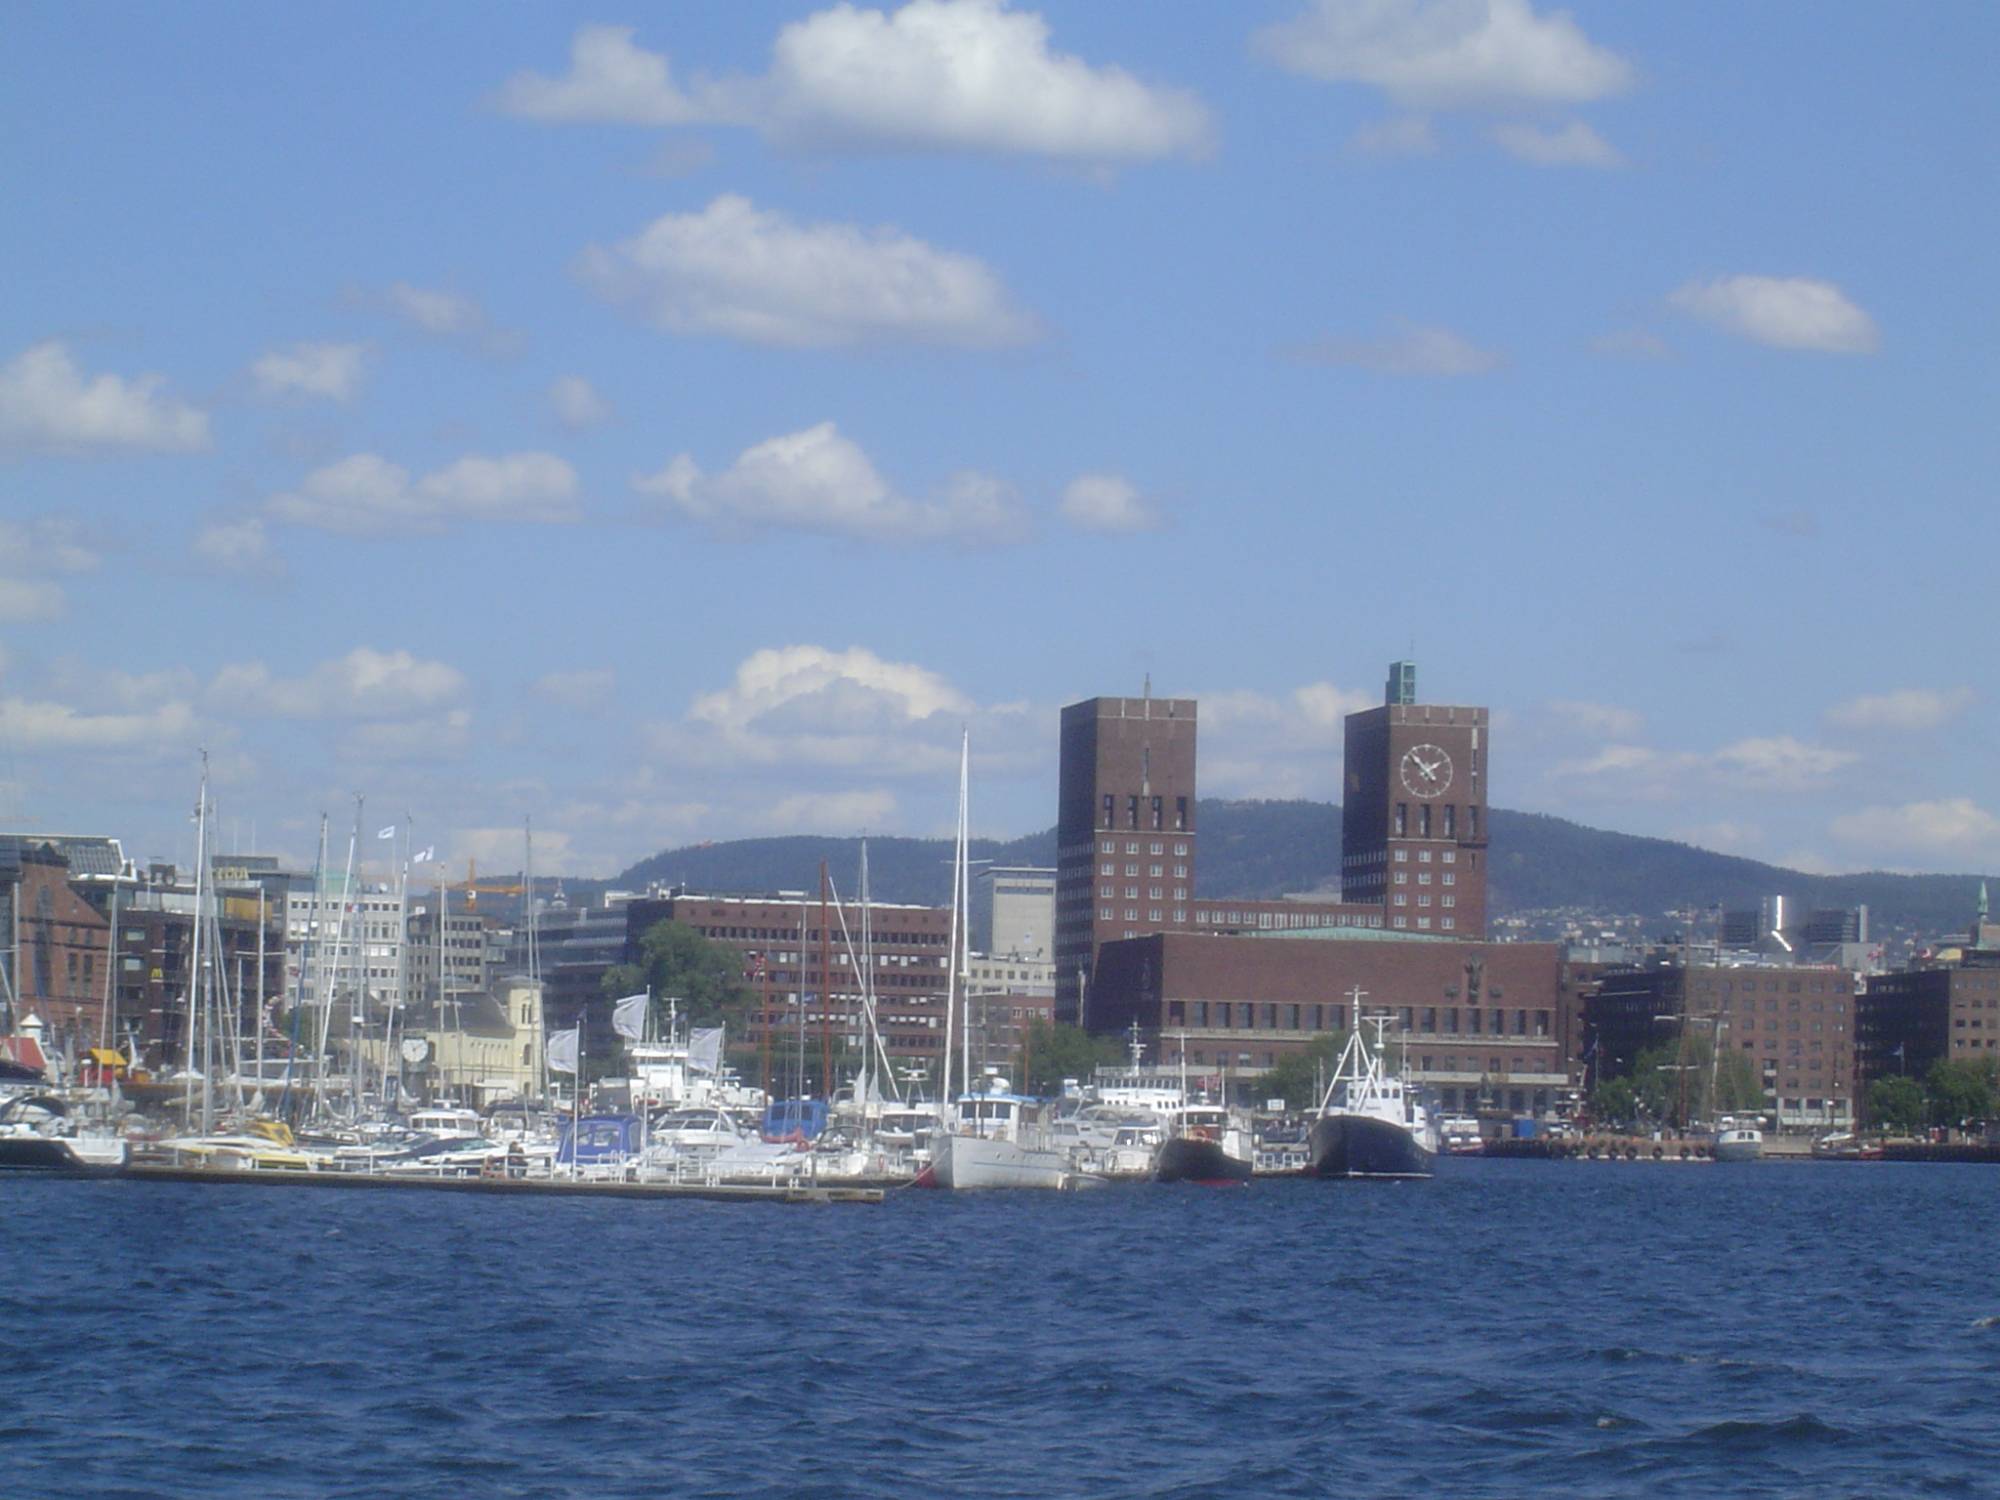 Oslo - viewed from the water